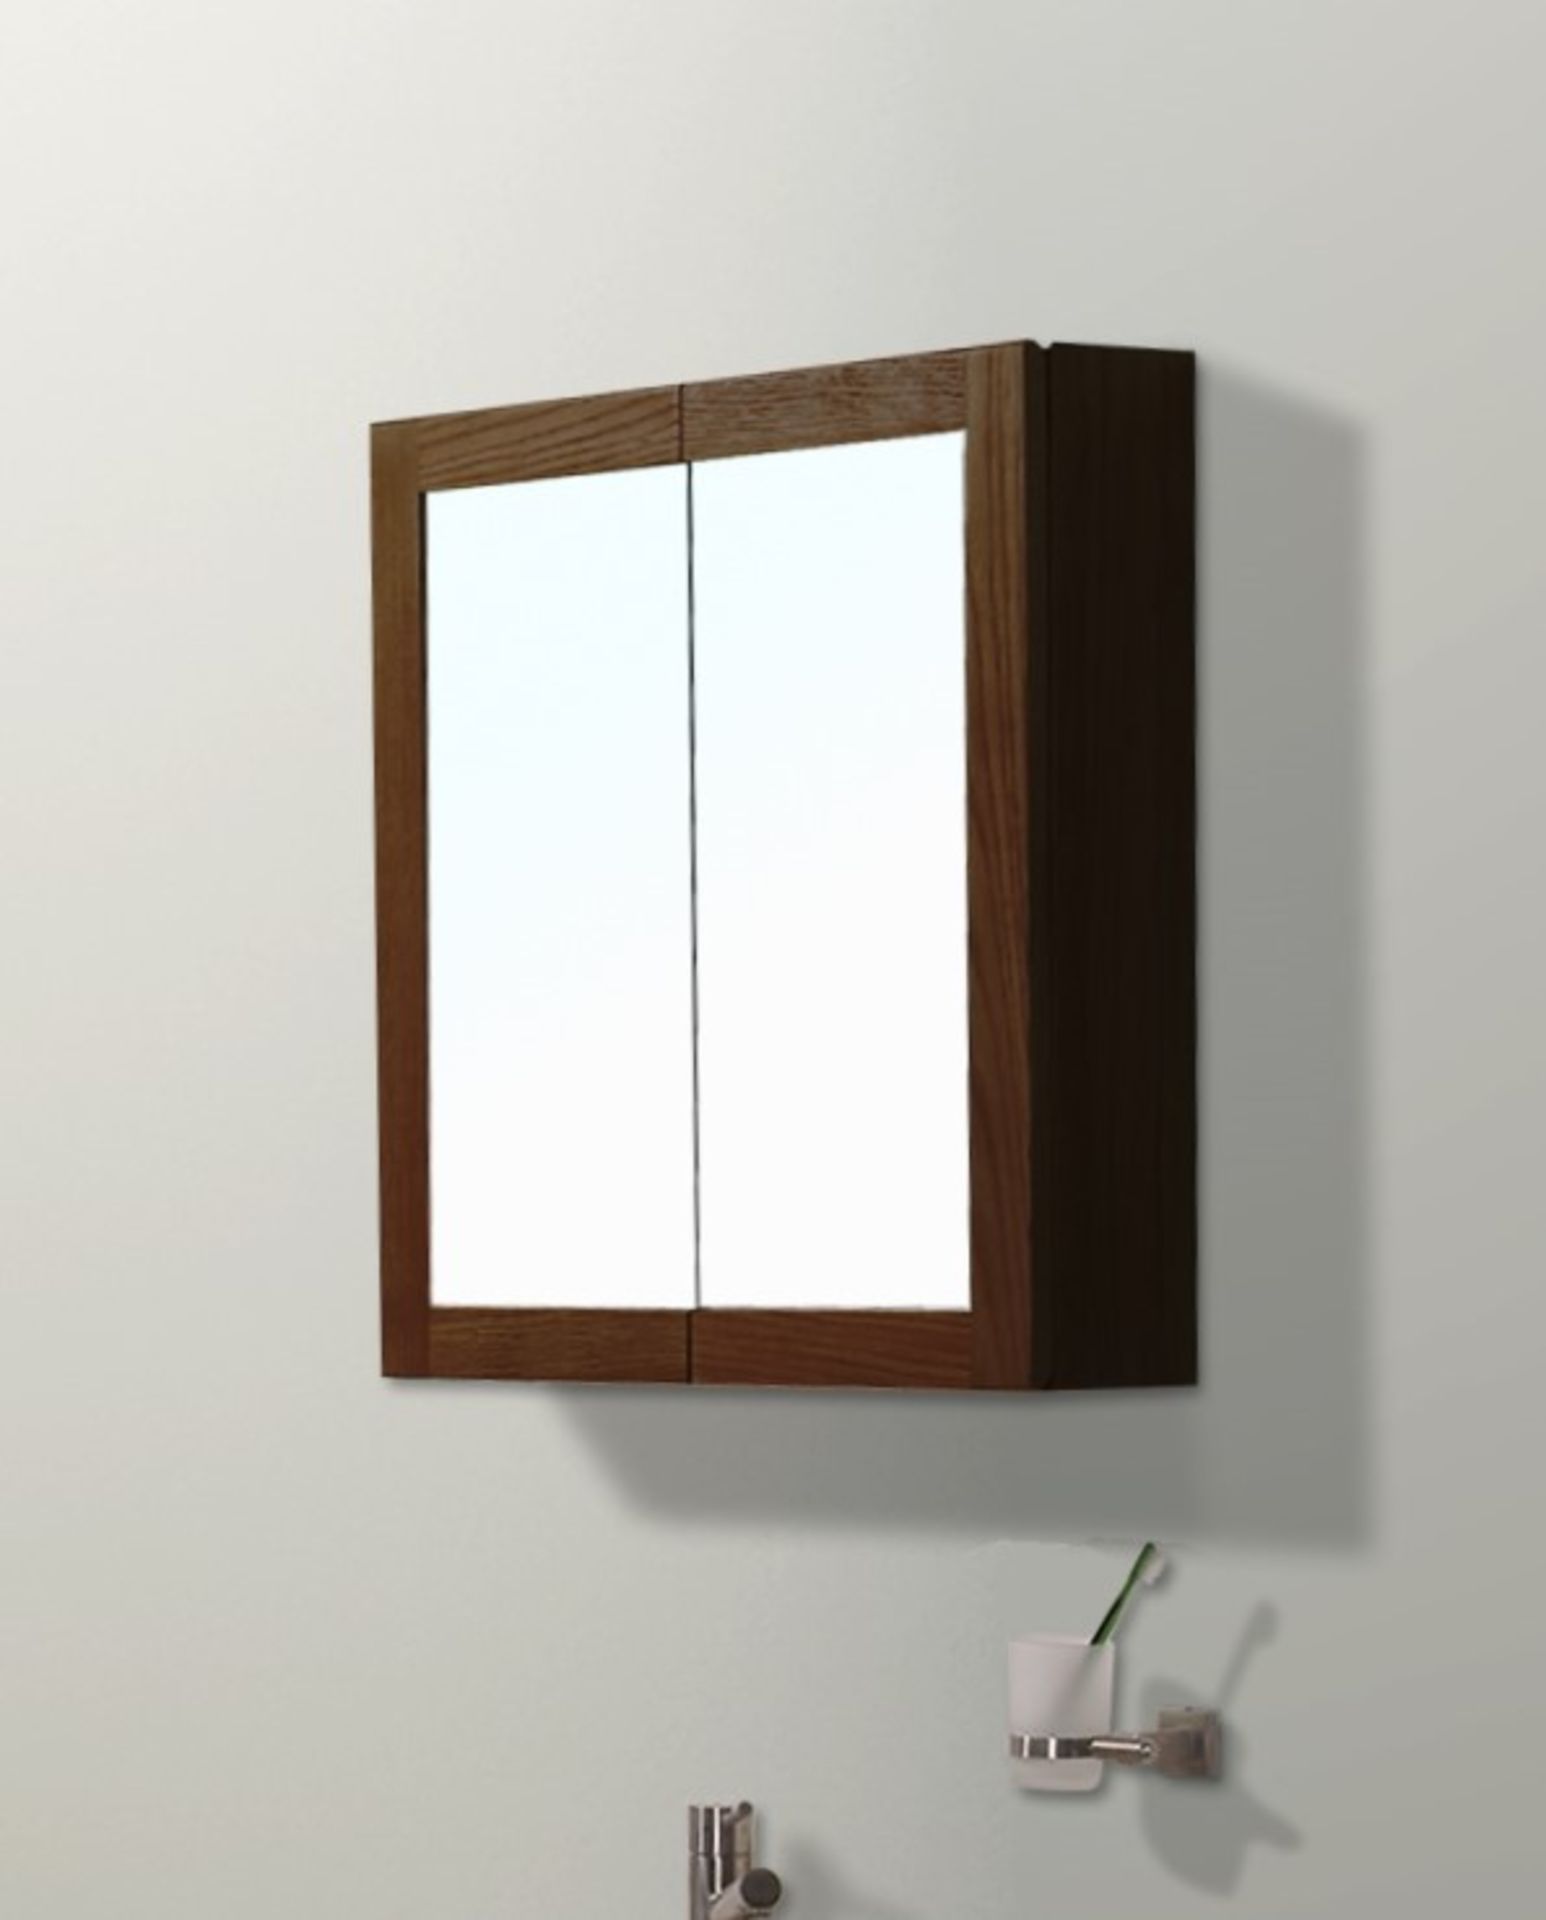 1 x Stonearth 600mm Wall Mounted Mirrored Bathroom Storage Cabinet - American Solid Walnut With - Image 2 of 10